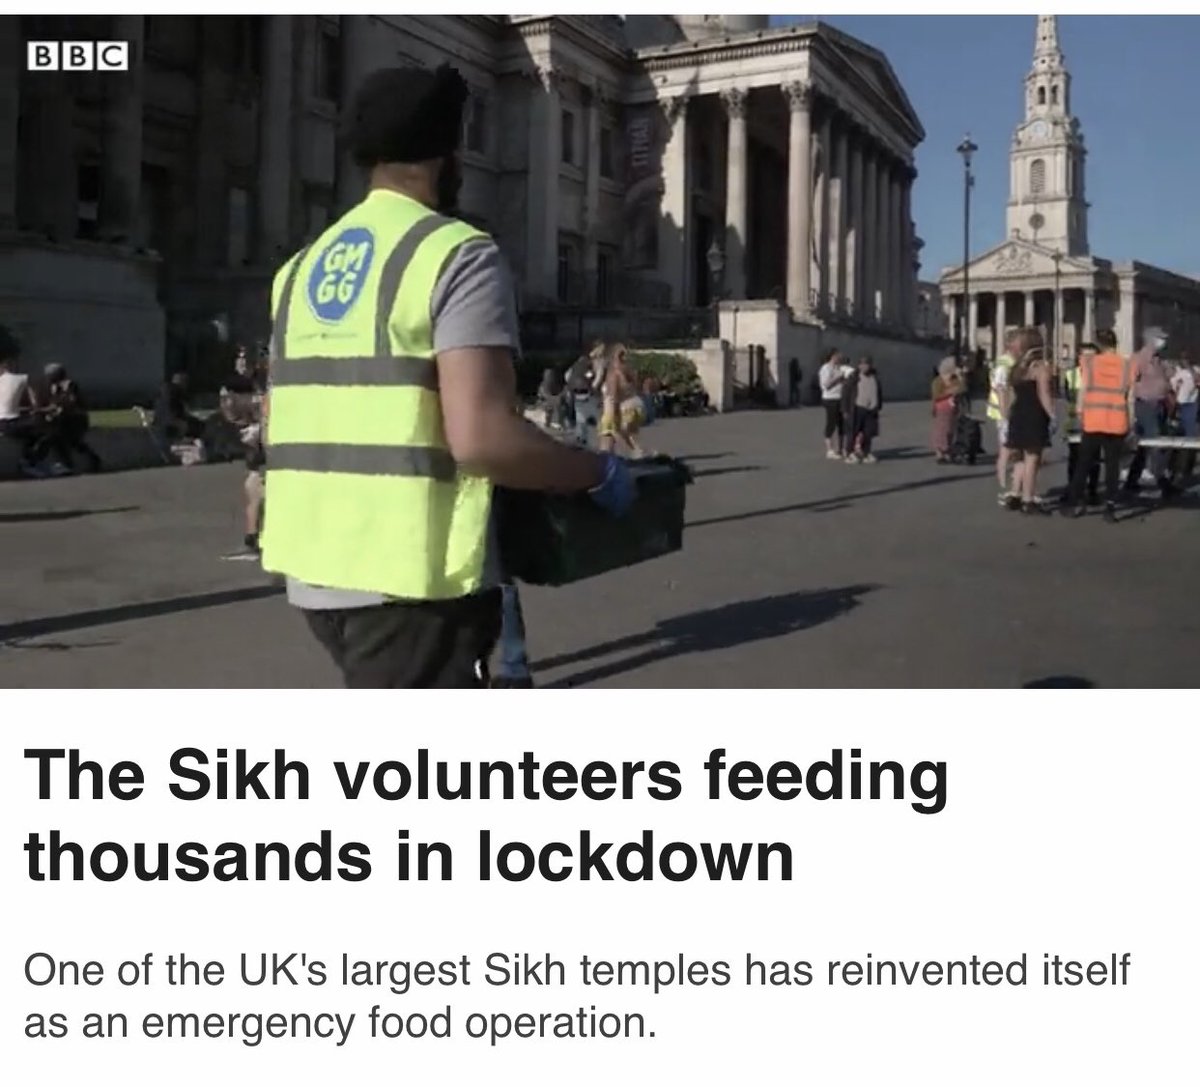 “…until our resources are completely finished we’re going to carry on.” 🙏 As featured on @BBCNews today and BBC online - bbc.co.uk/news/uk-529668… ⠀ #COVID__19 #Sikh #volunteers #BBC